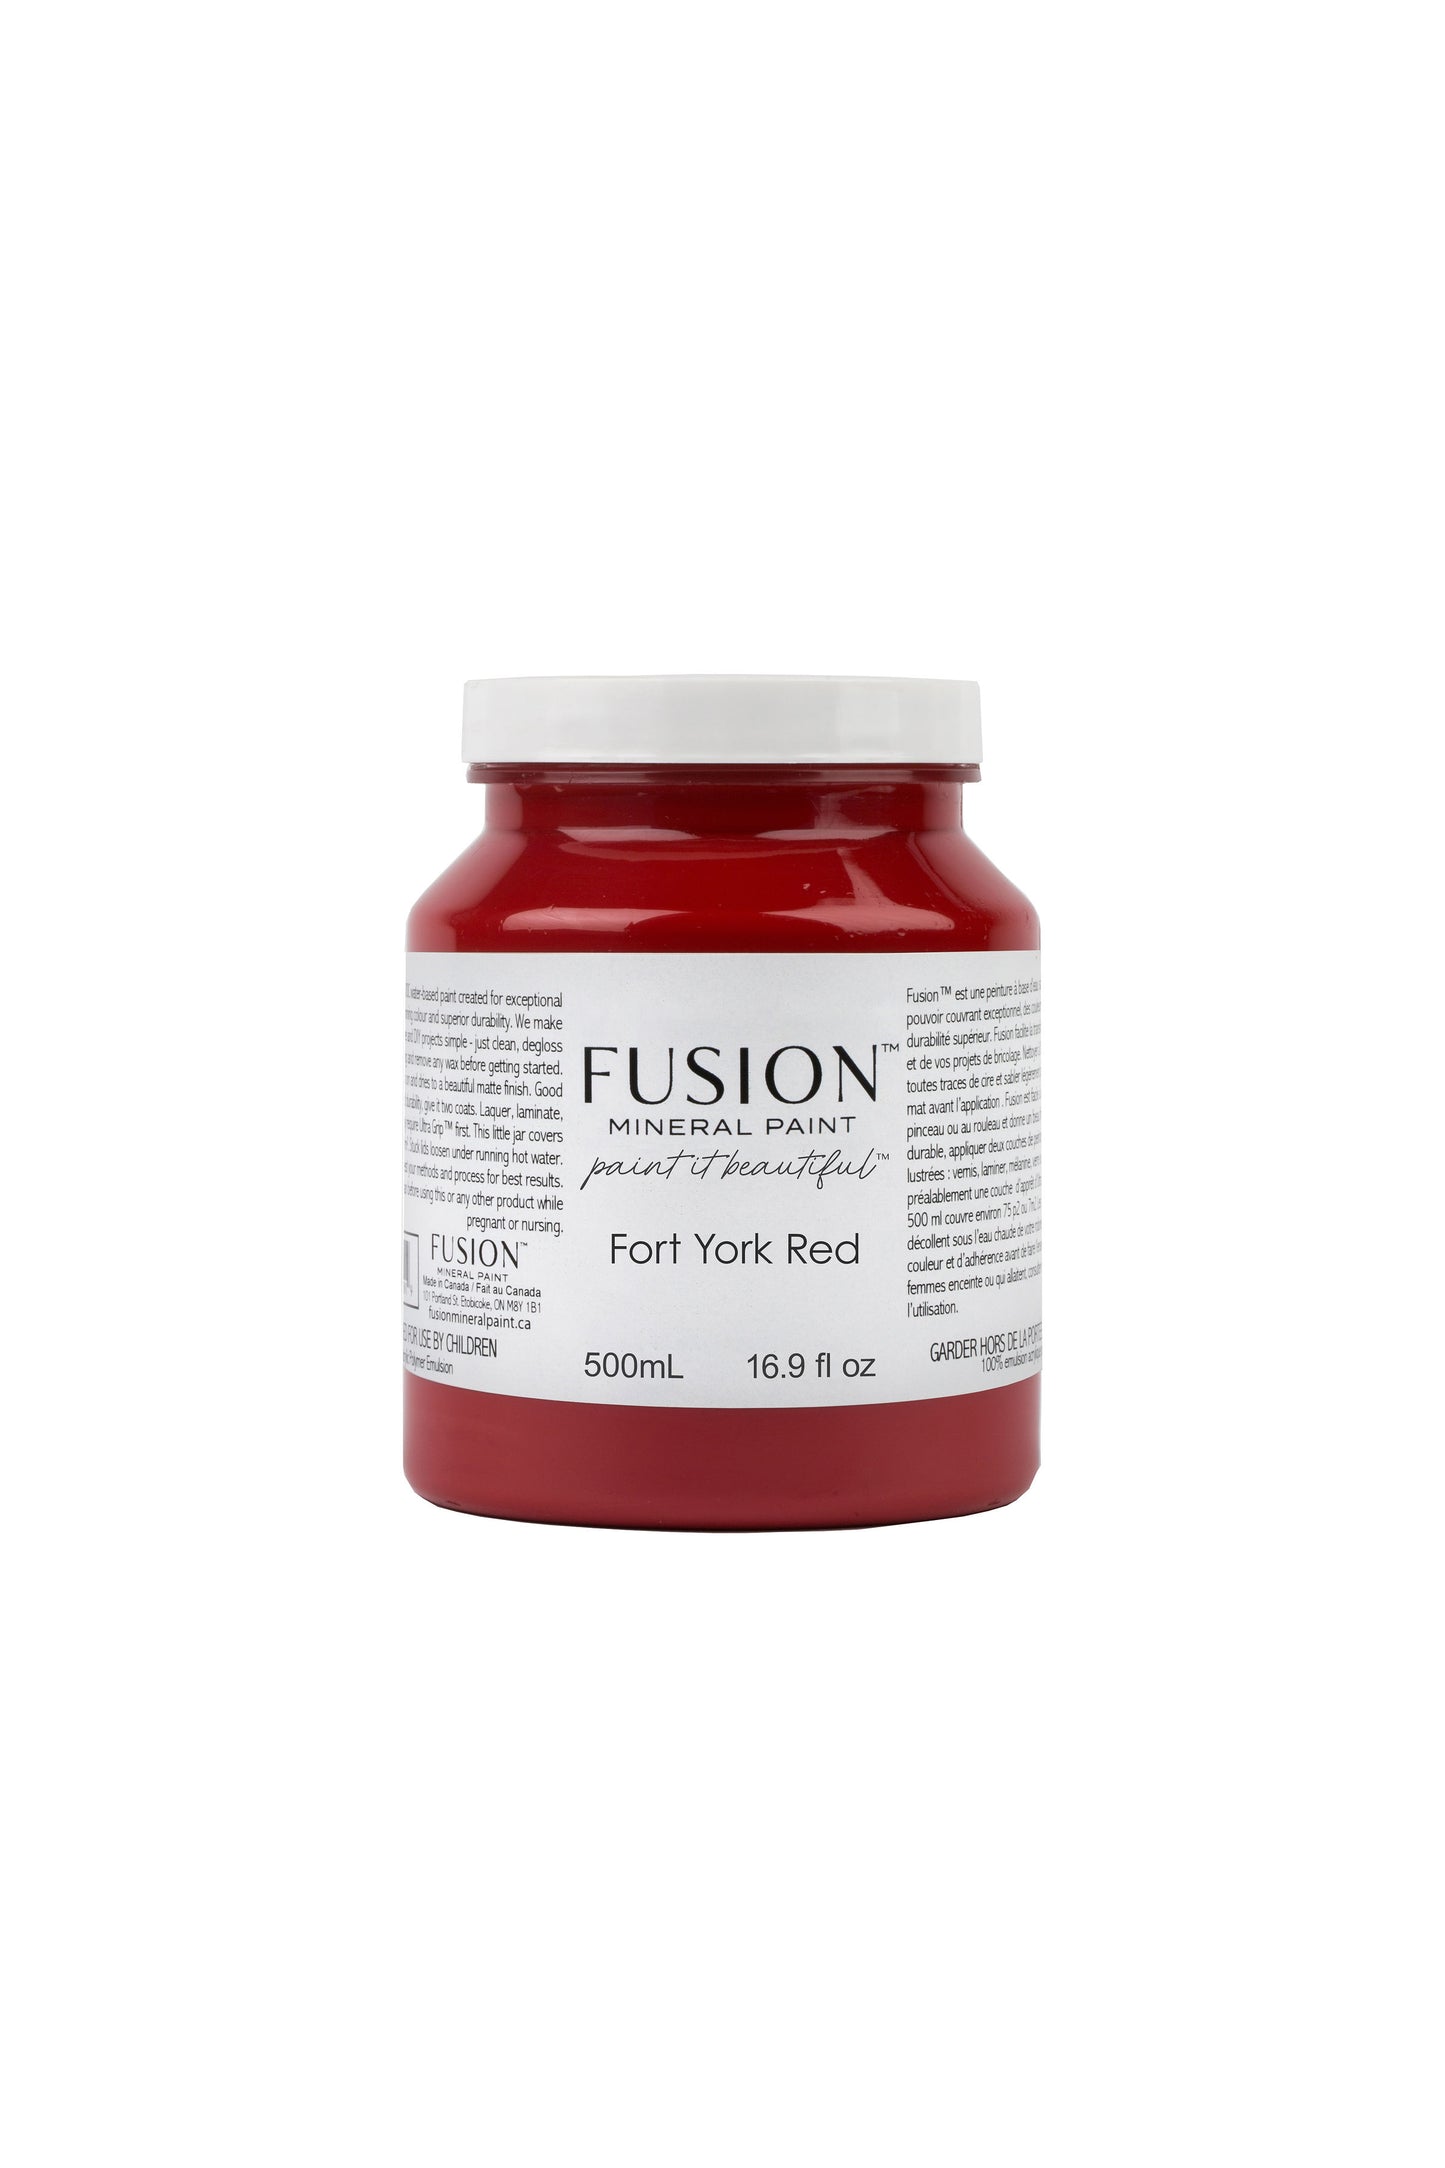 FUSION MINERAL PAINT- Fort York Red